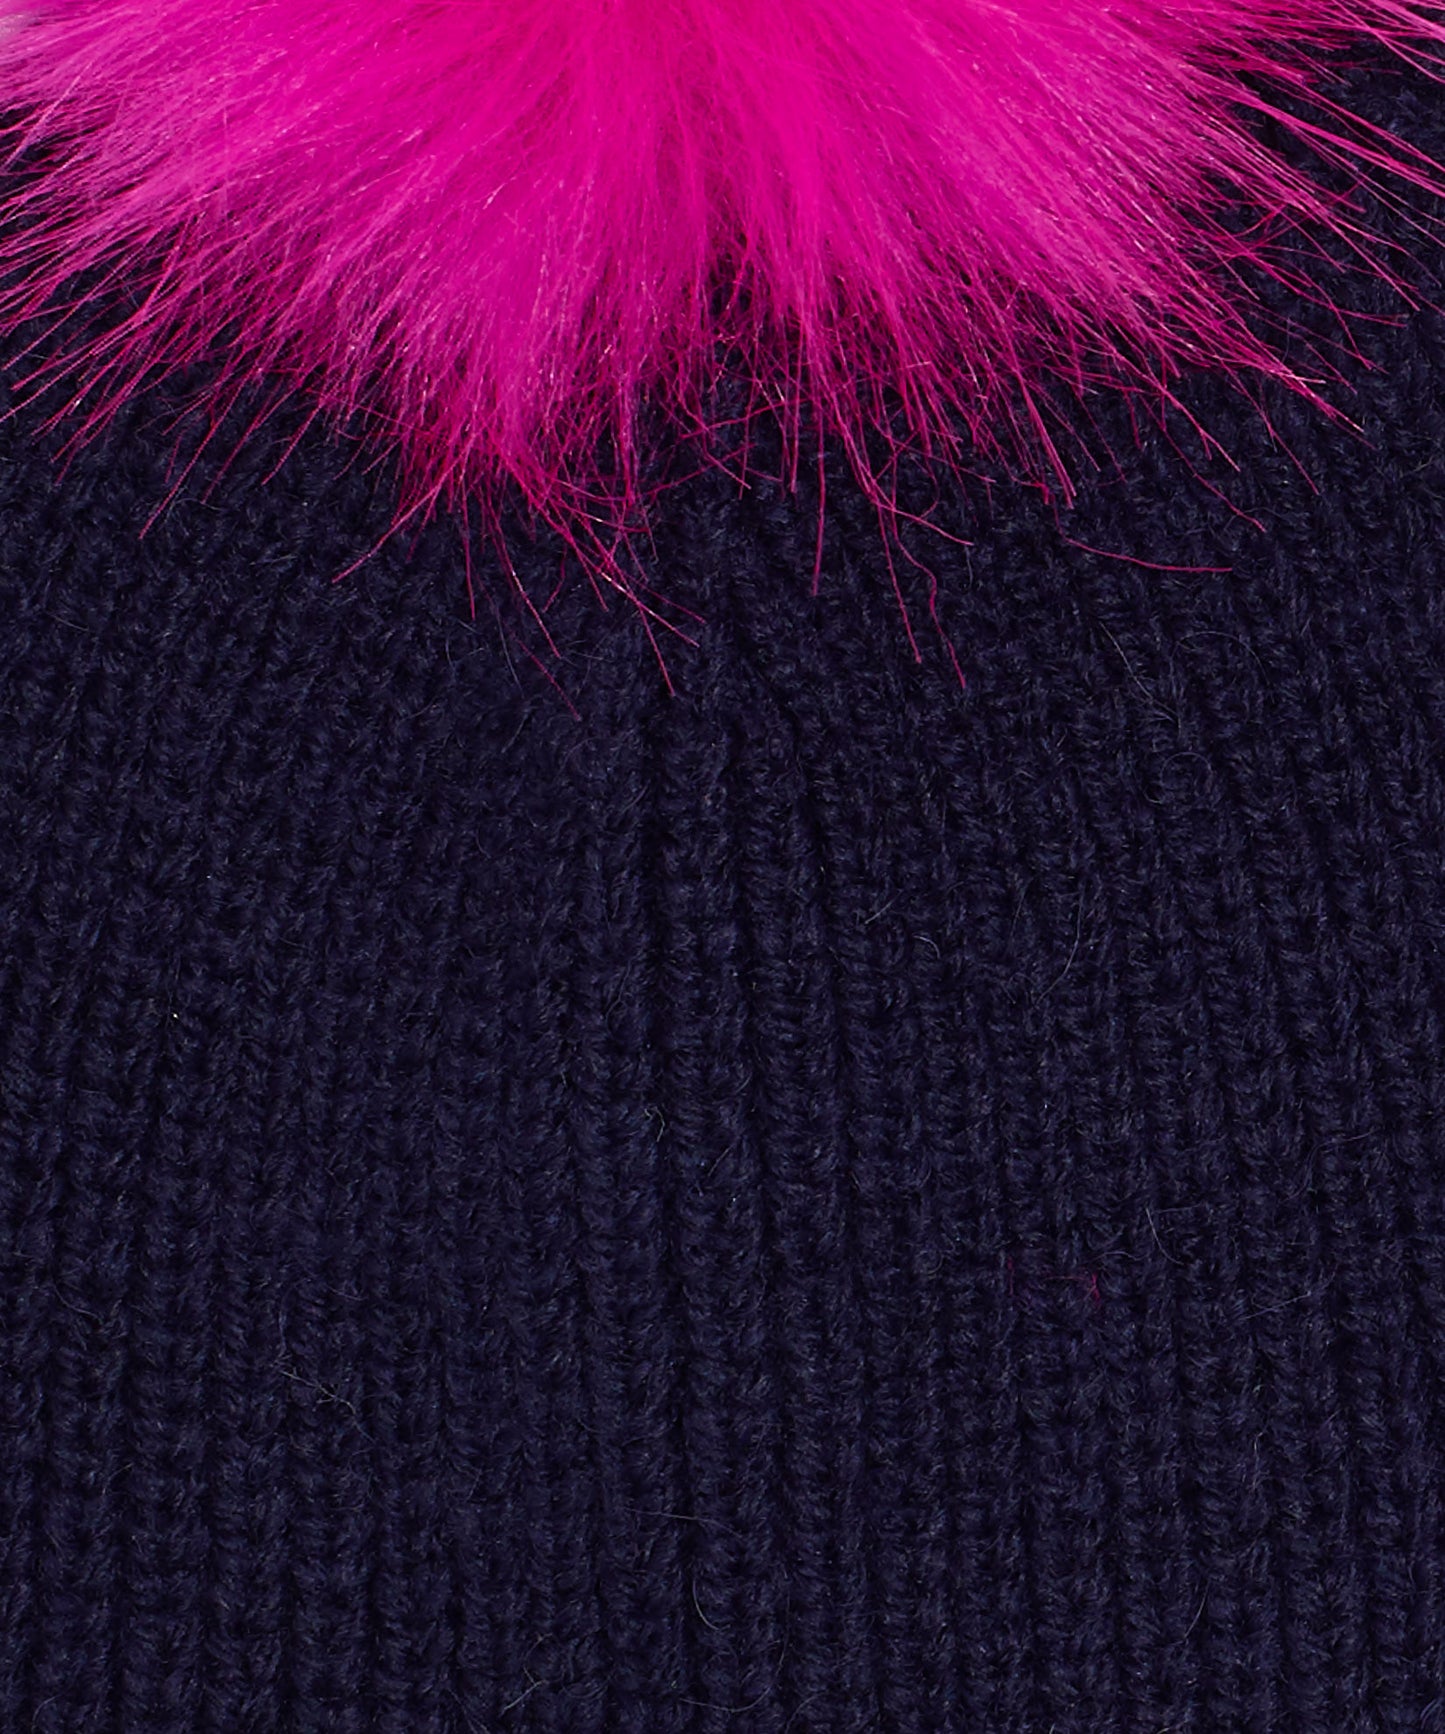 Ribbed Faux Fur Pom Hat in color Navy